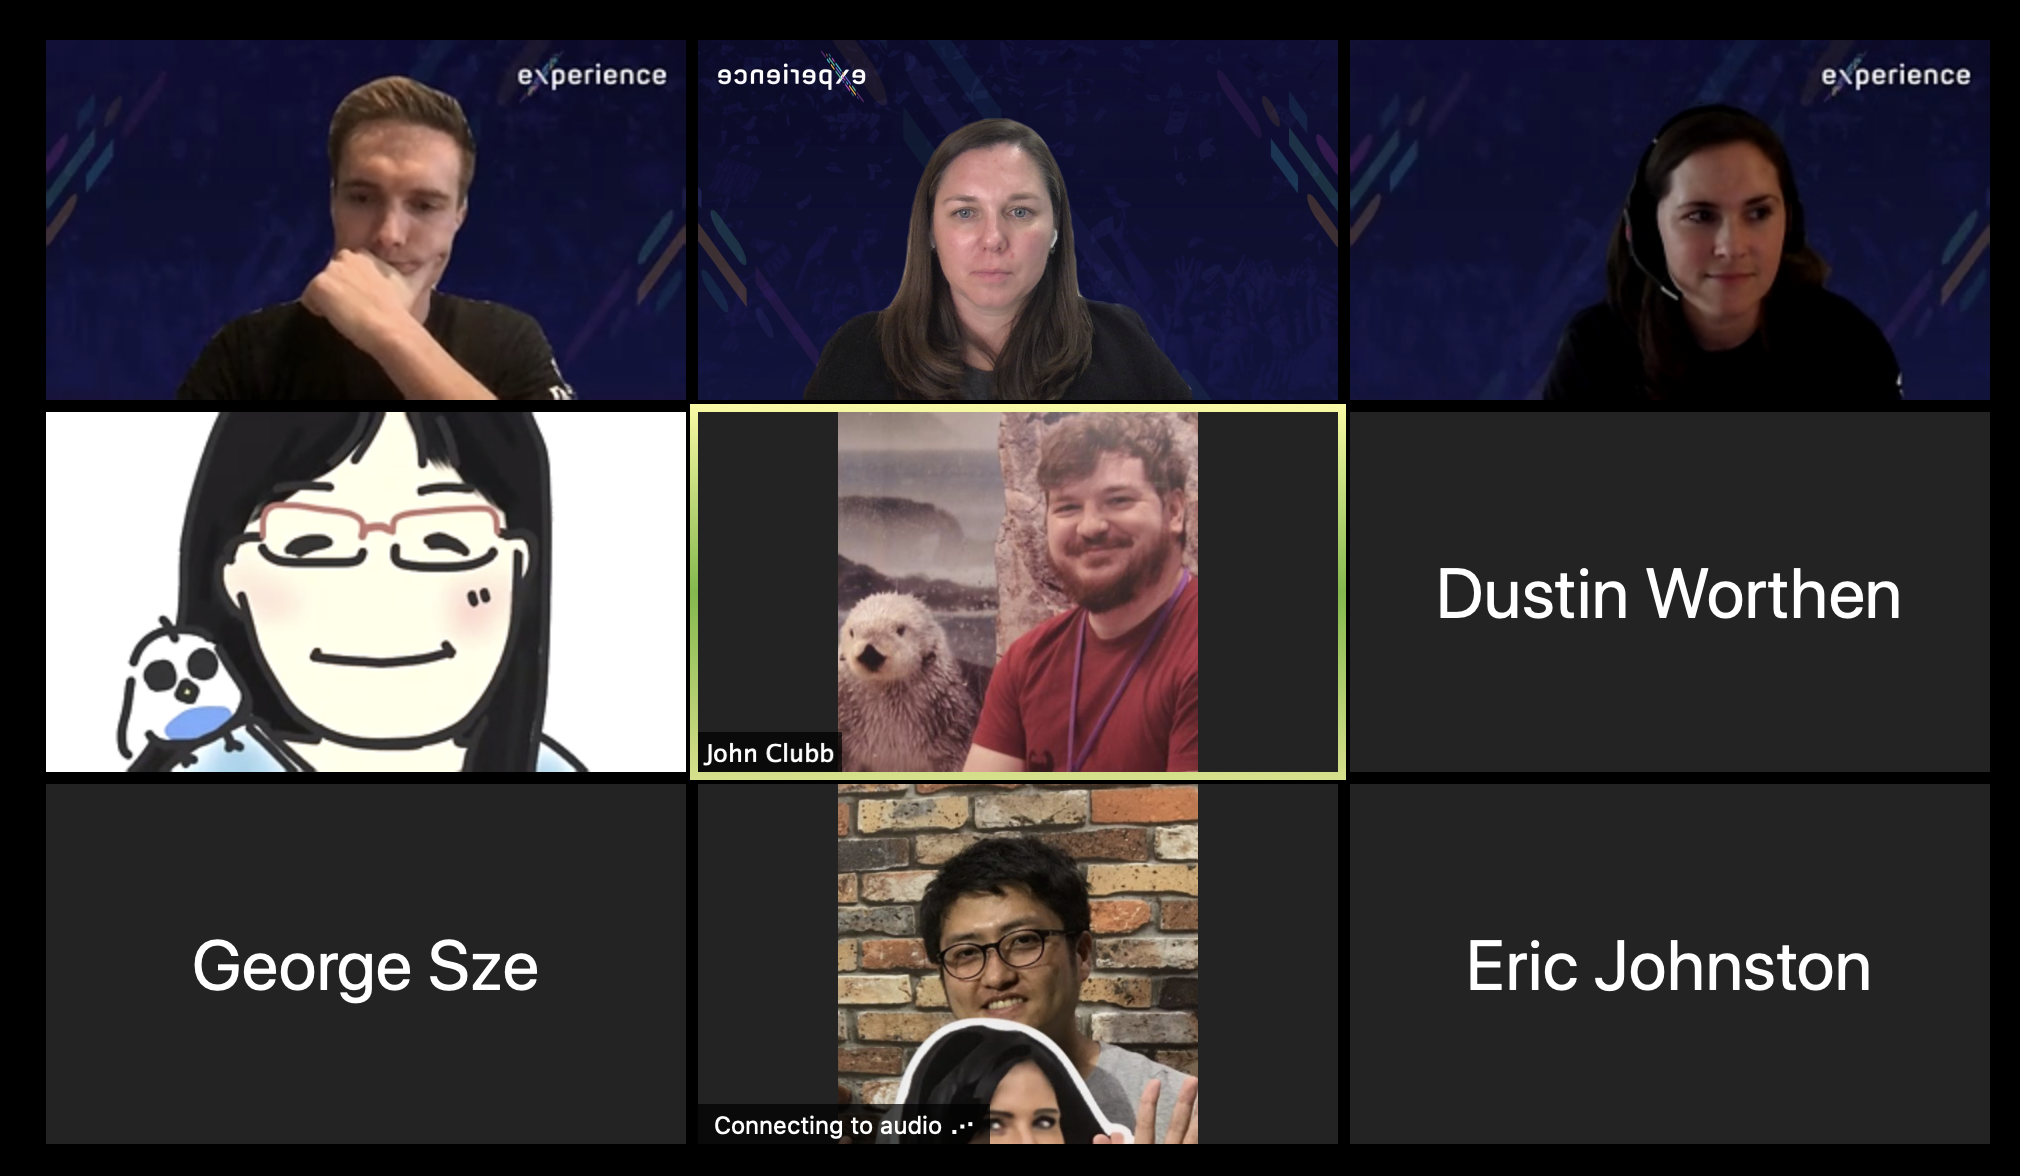 A Zoom meeting with 9 participants. 3 only have names up and 1 has a drawn picture instead of their face.